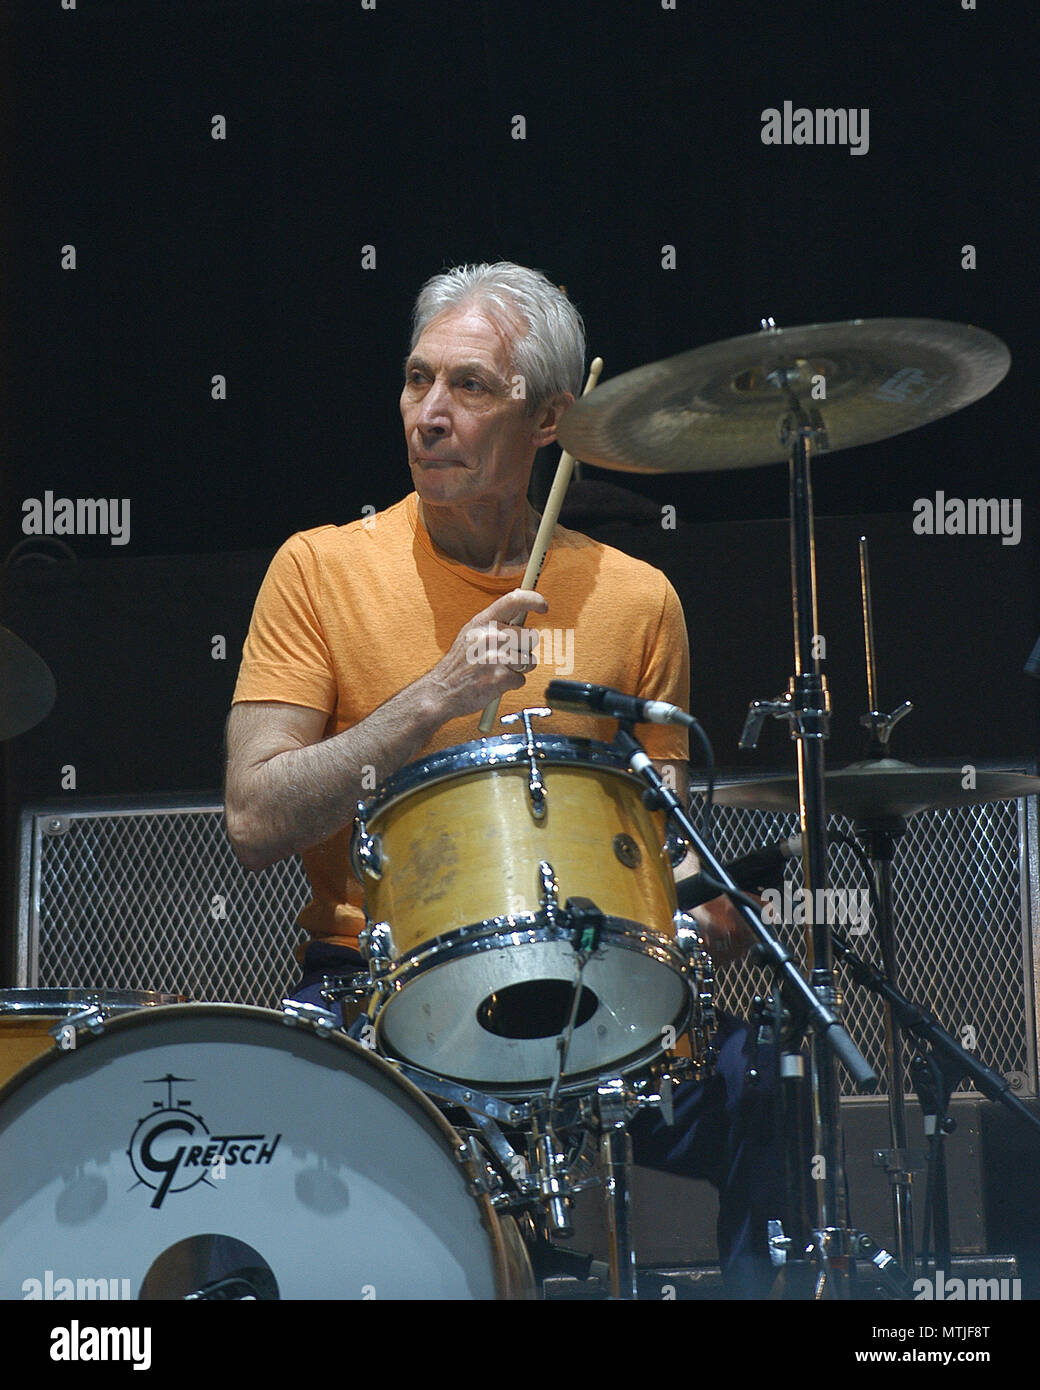 Charlie Watts Rolling Stones Stock Photos & Charlie Watts Rolling ...